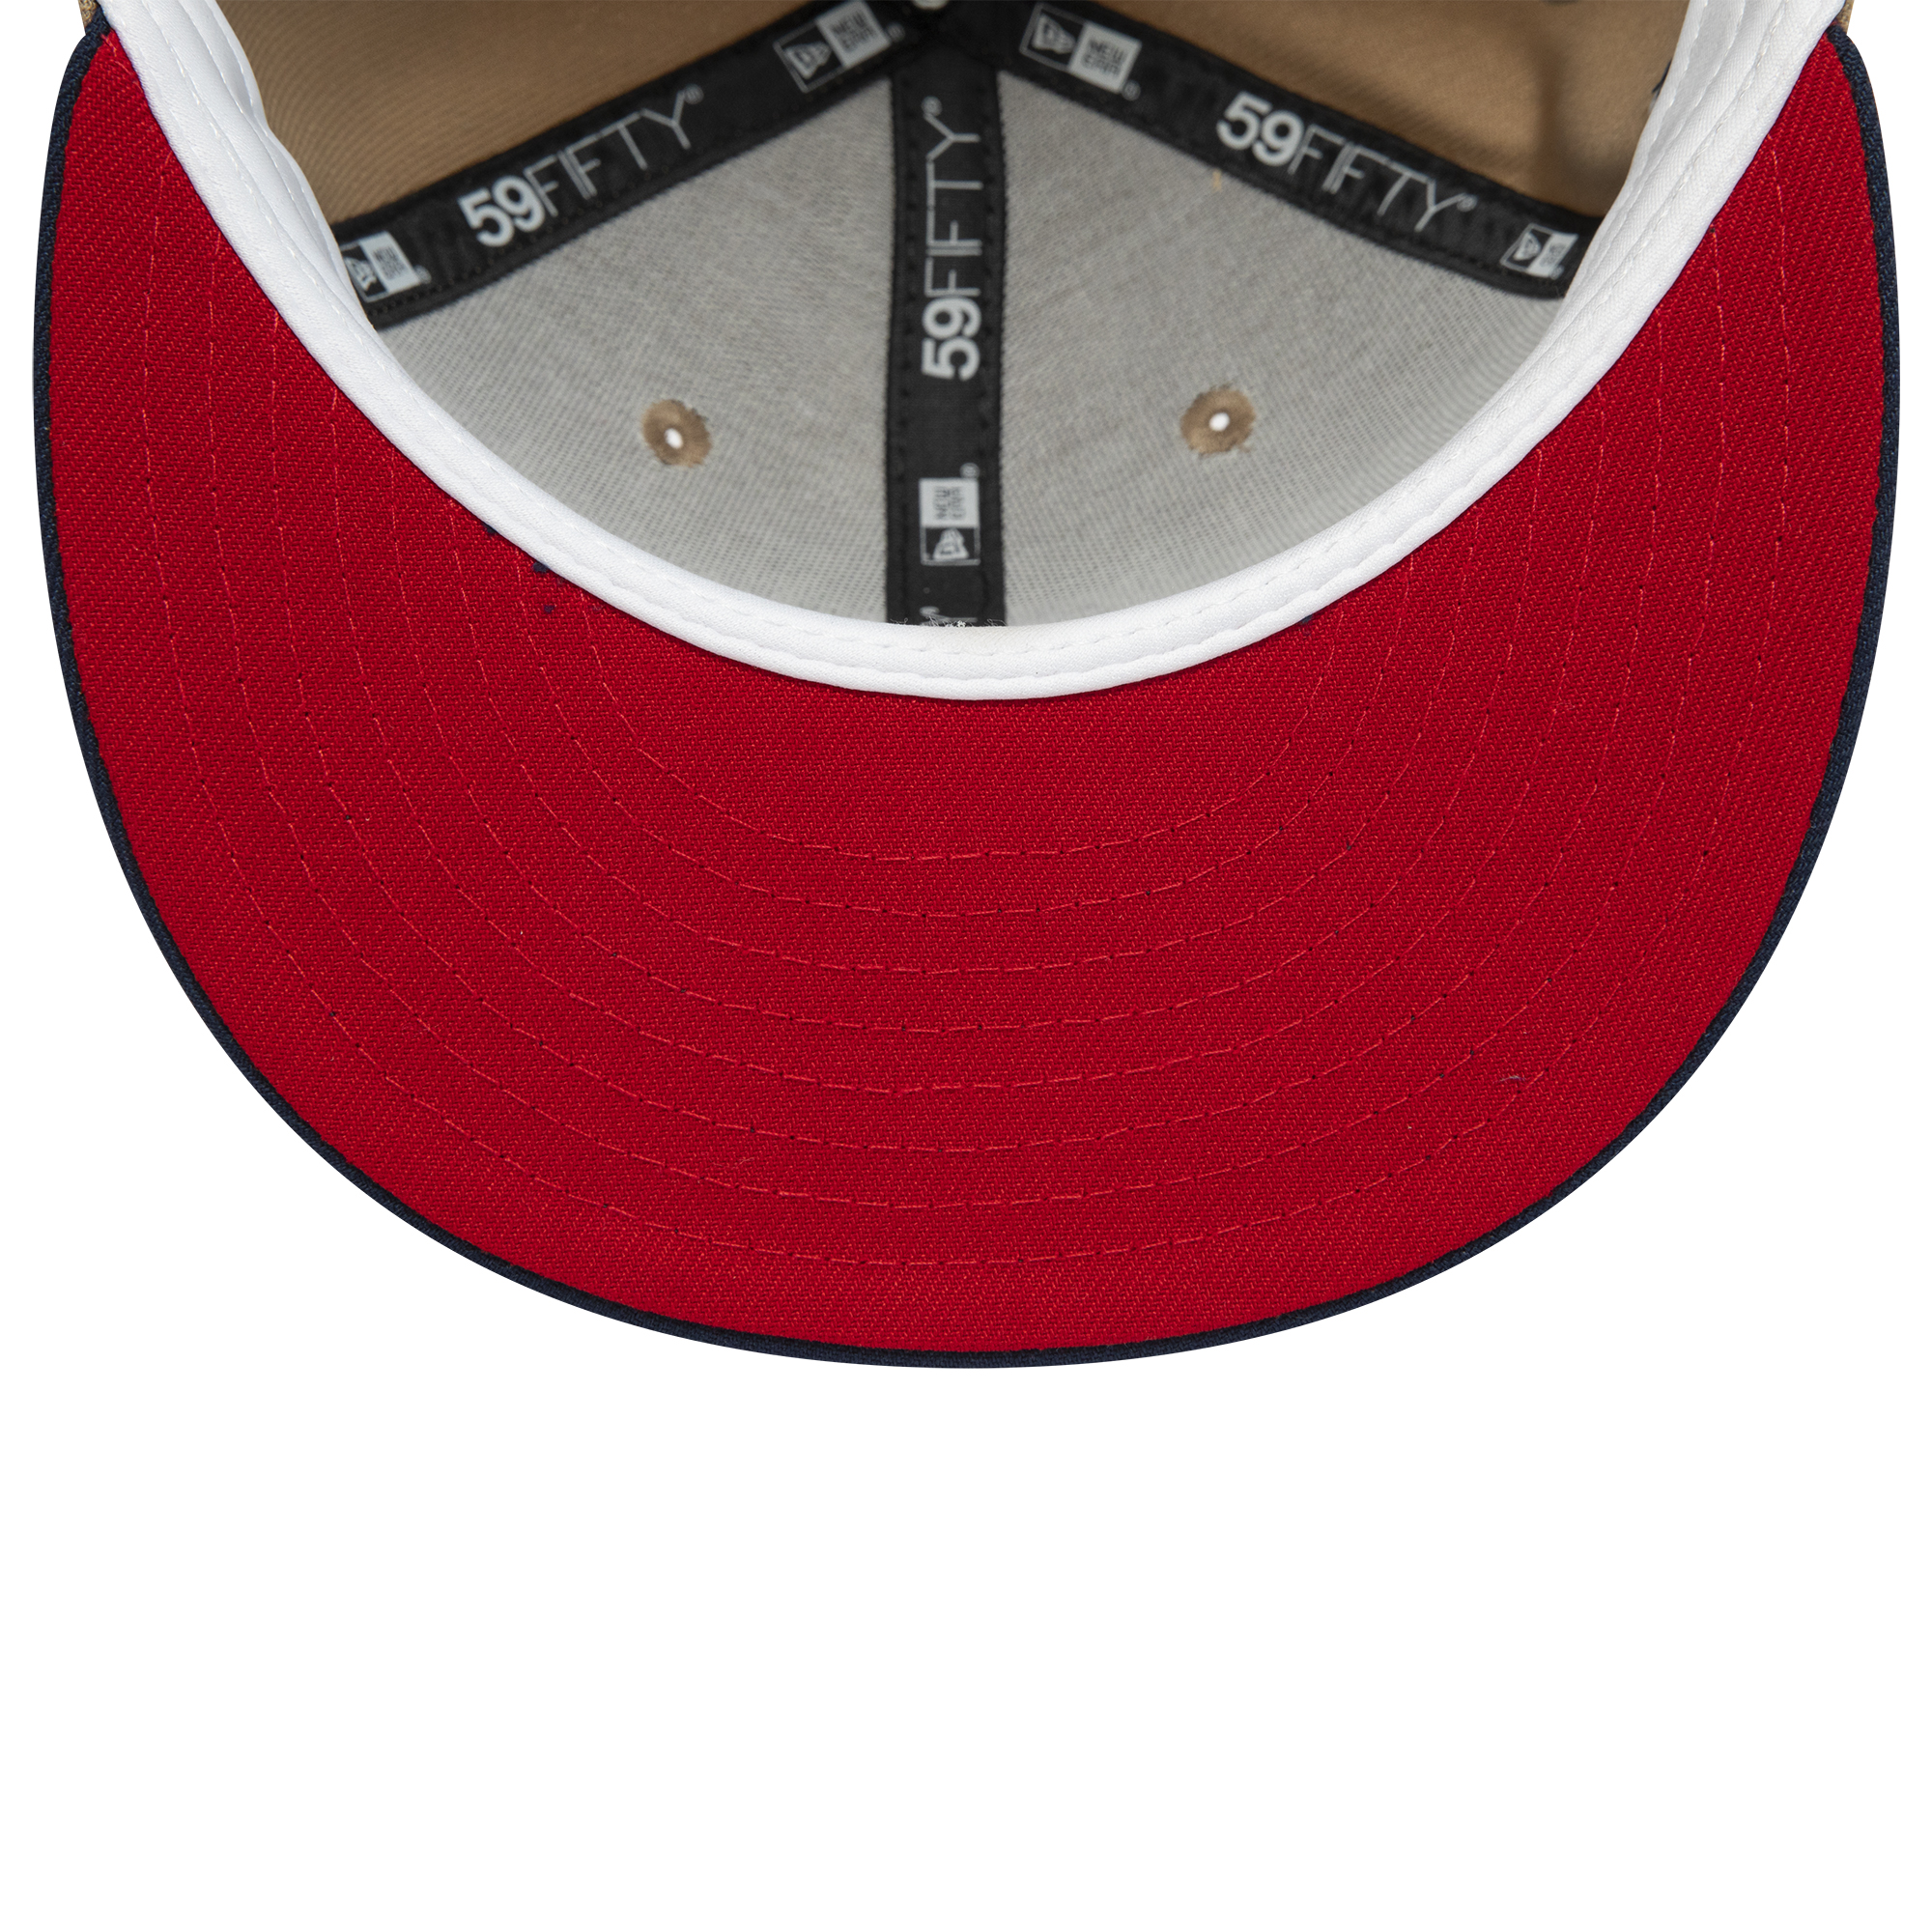 Casquette 59FIFTY Fitted Chicago White Sox Camel